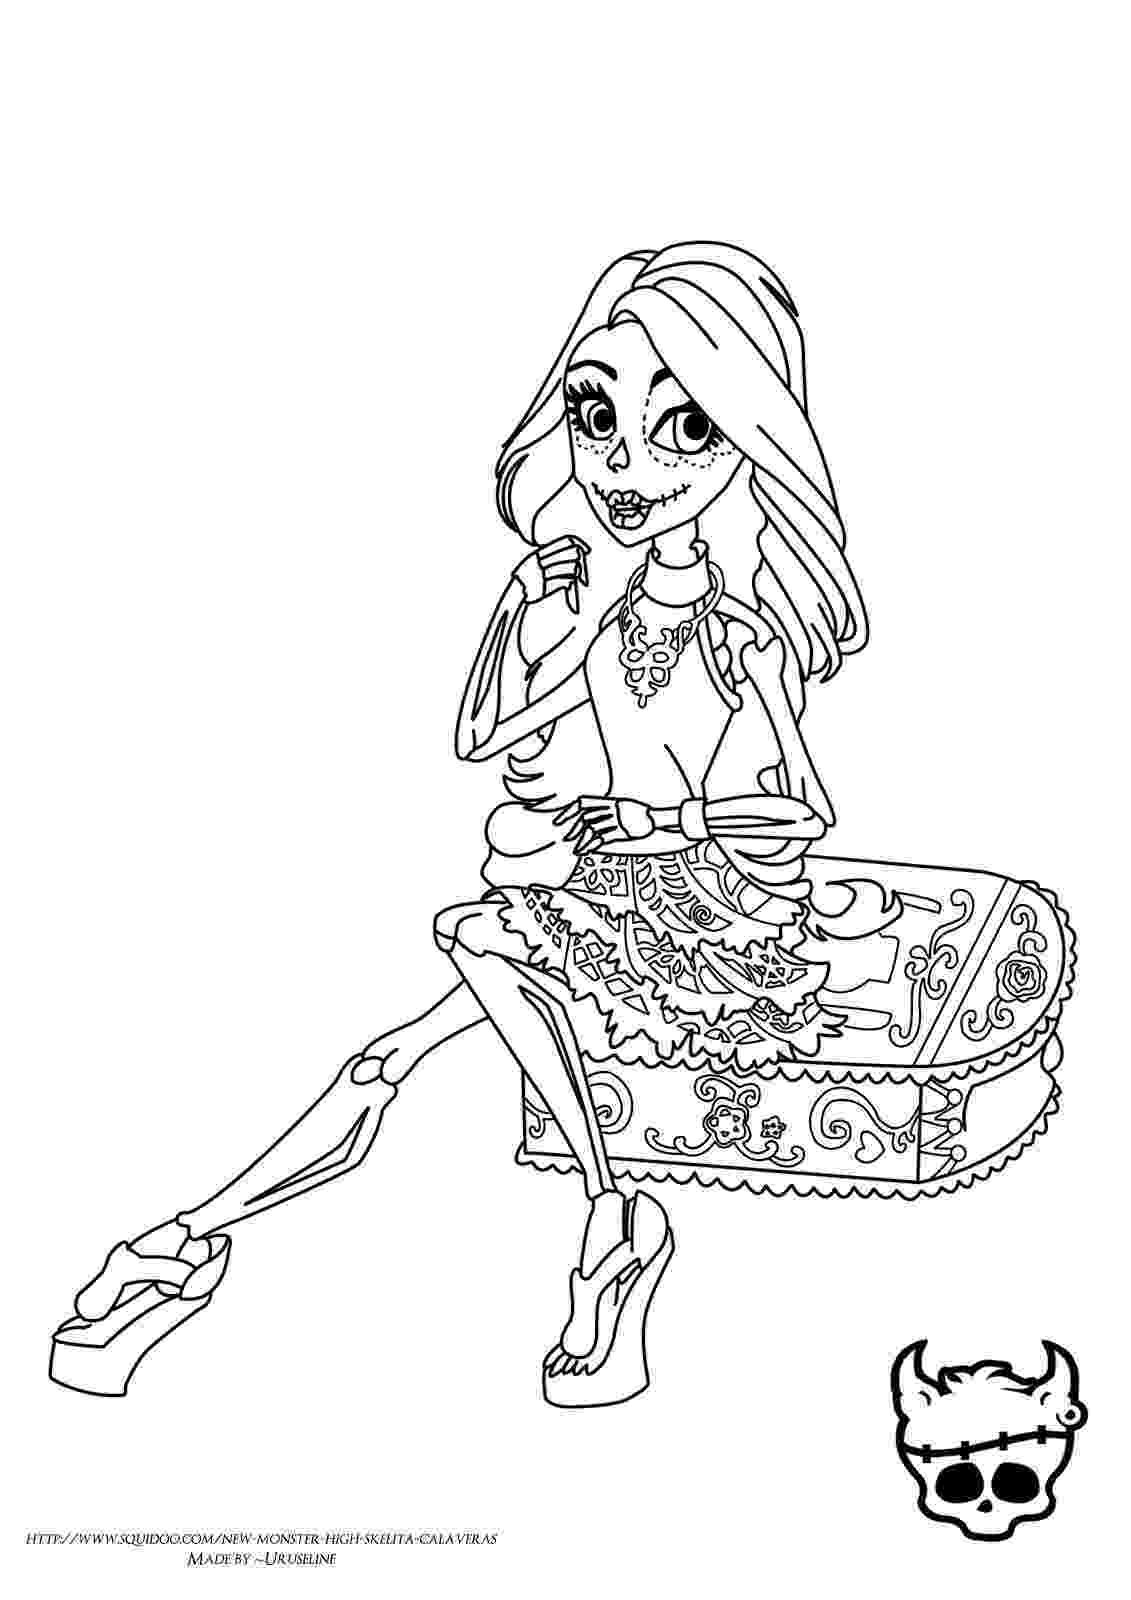 coloring pages of monster high dolls baby monster high coloring pages monster high doll of coloring monster high pages dolls 